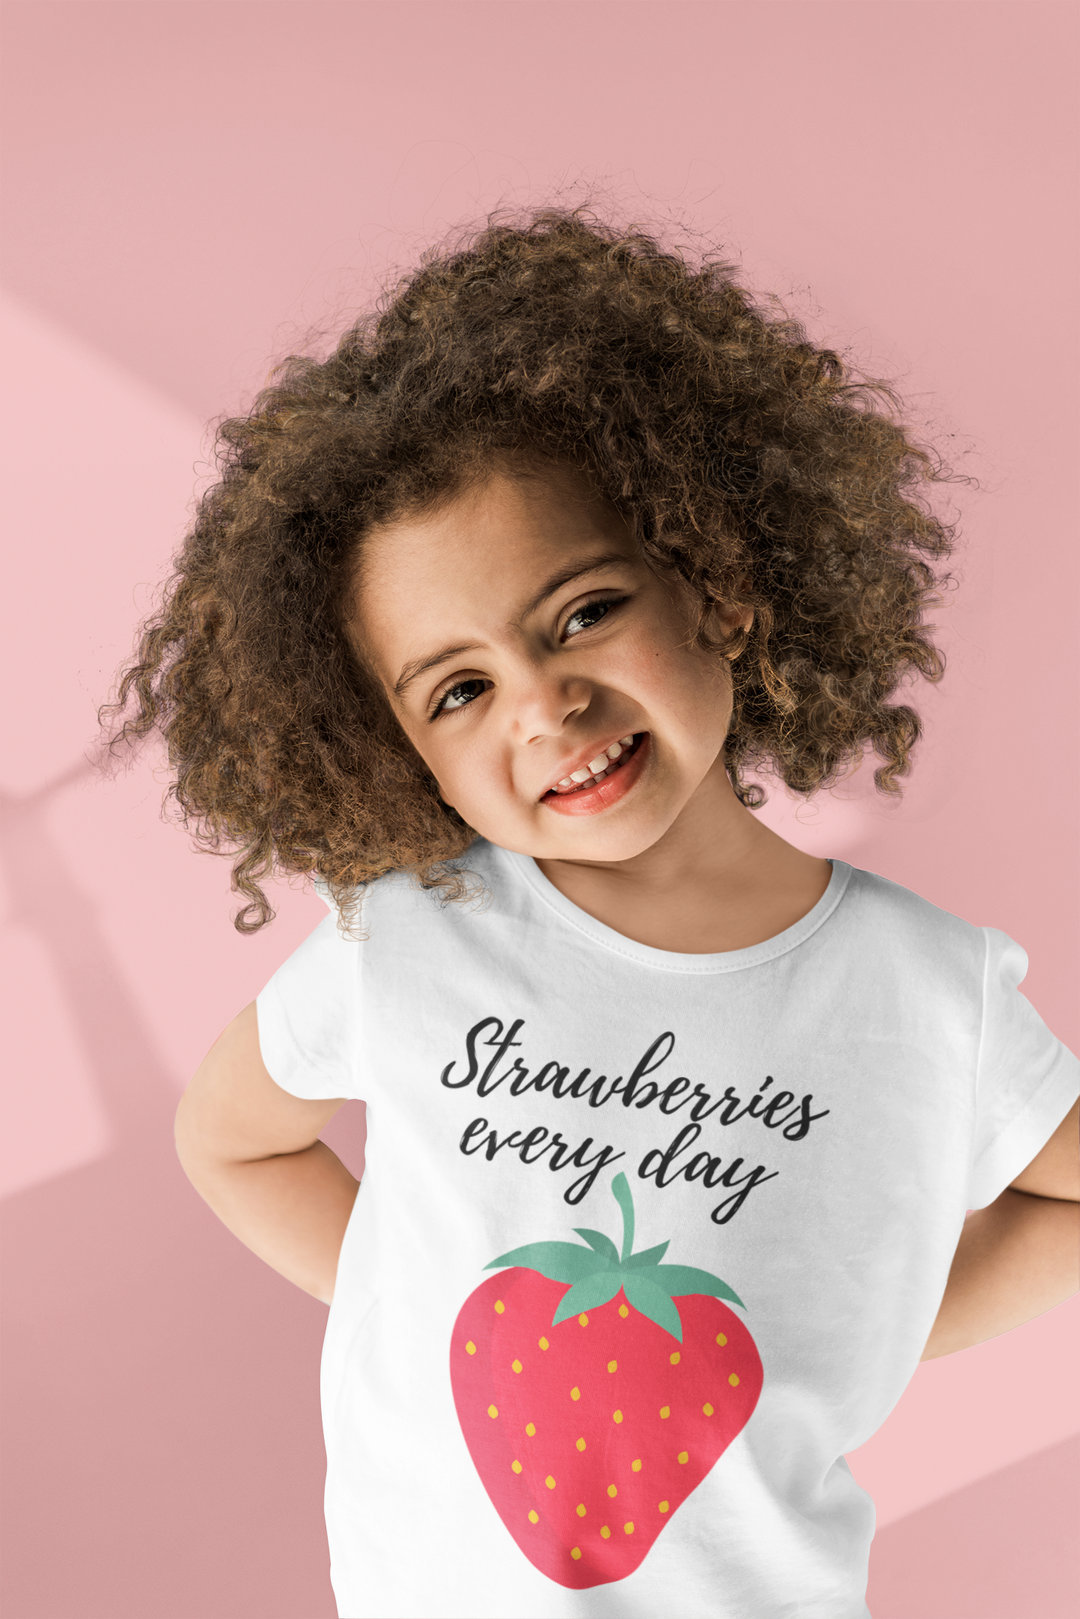 Strawberries every day. Short sleeve t shirt for toddler and kids. - TeesForToddlersandKids -  t-shirt - seasons, summer - strawberries-every-day-short-sleeve-t-shirt